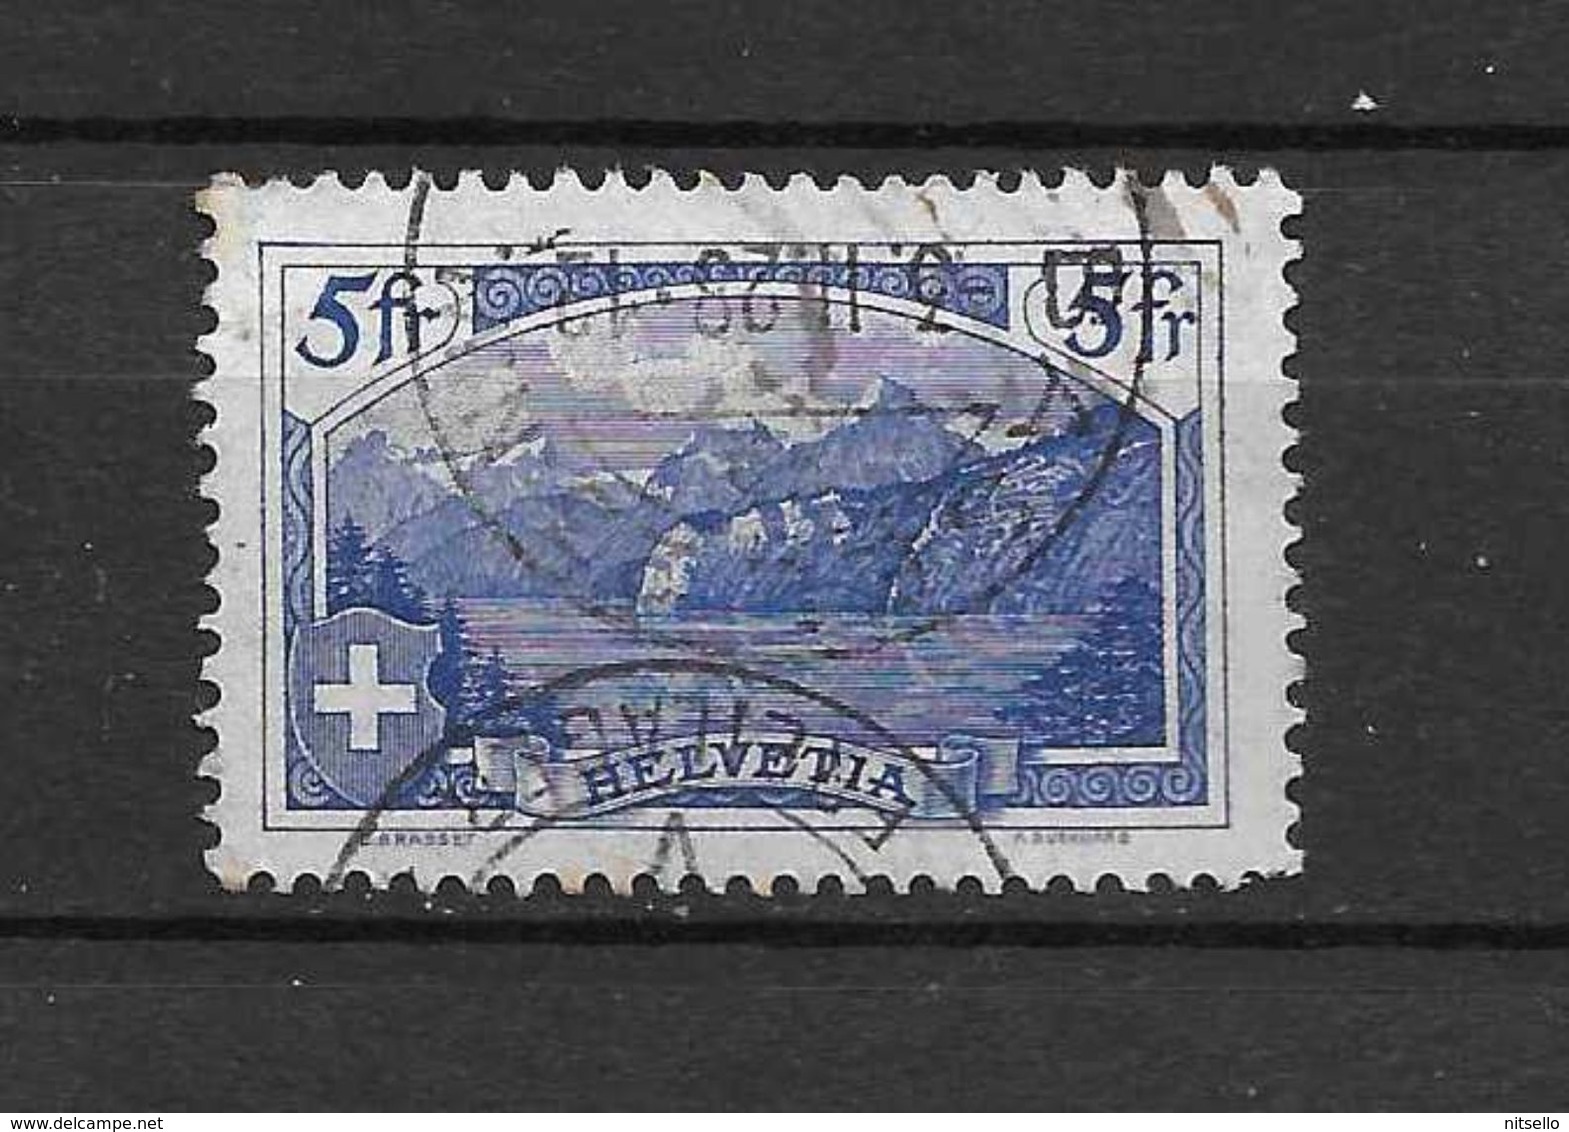 LOTE 1576  ///  SUIZA  1914     YVERT Nº: 143     ¡¡¡¡¡ LIQUIDATION !!!!!!! - Used Stamps